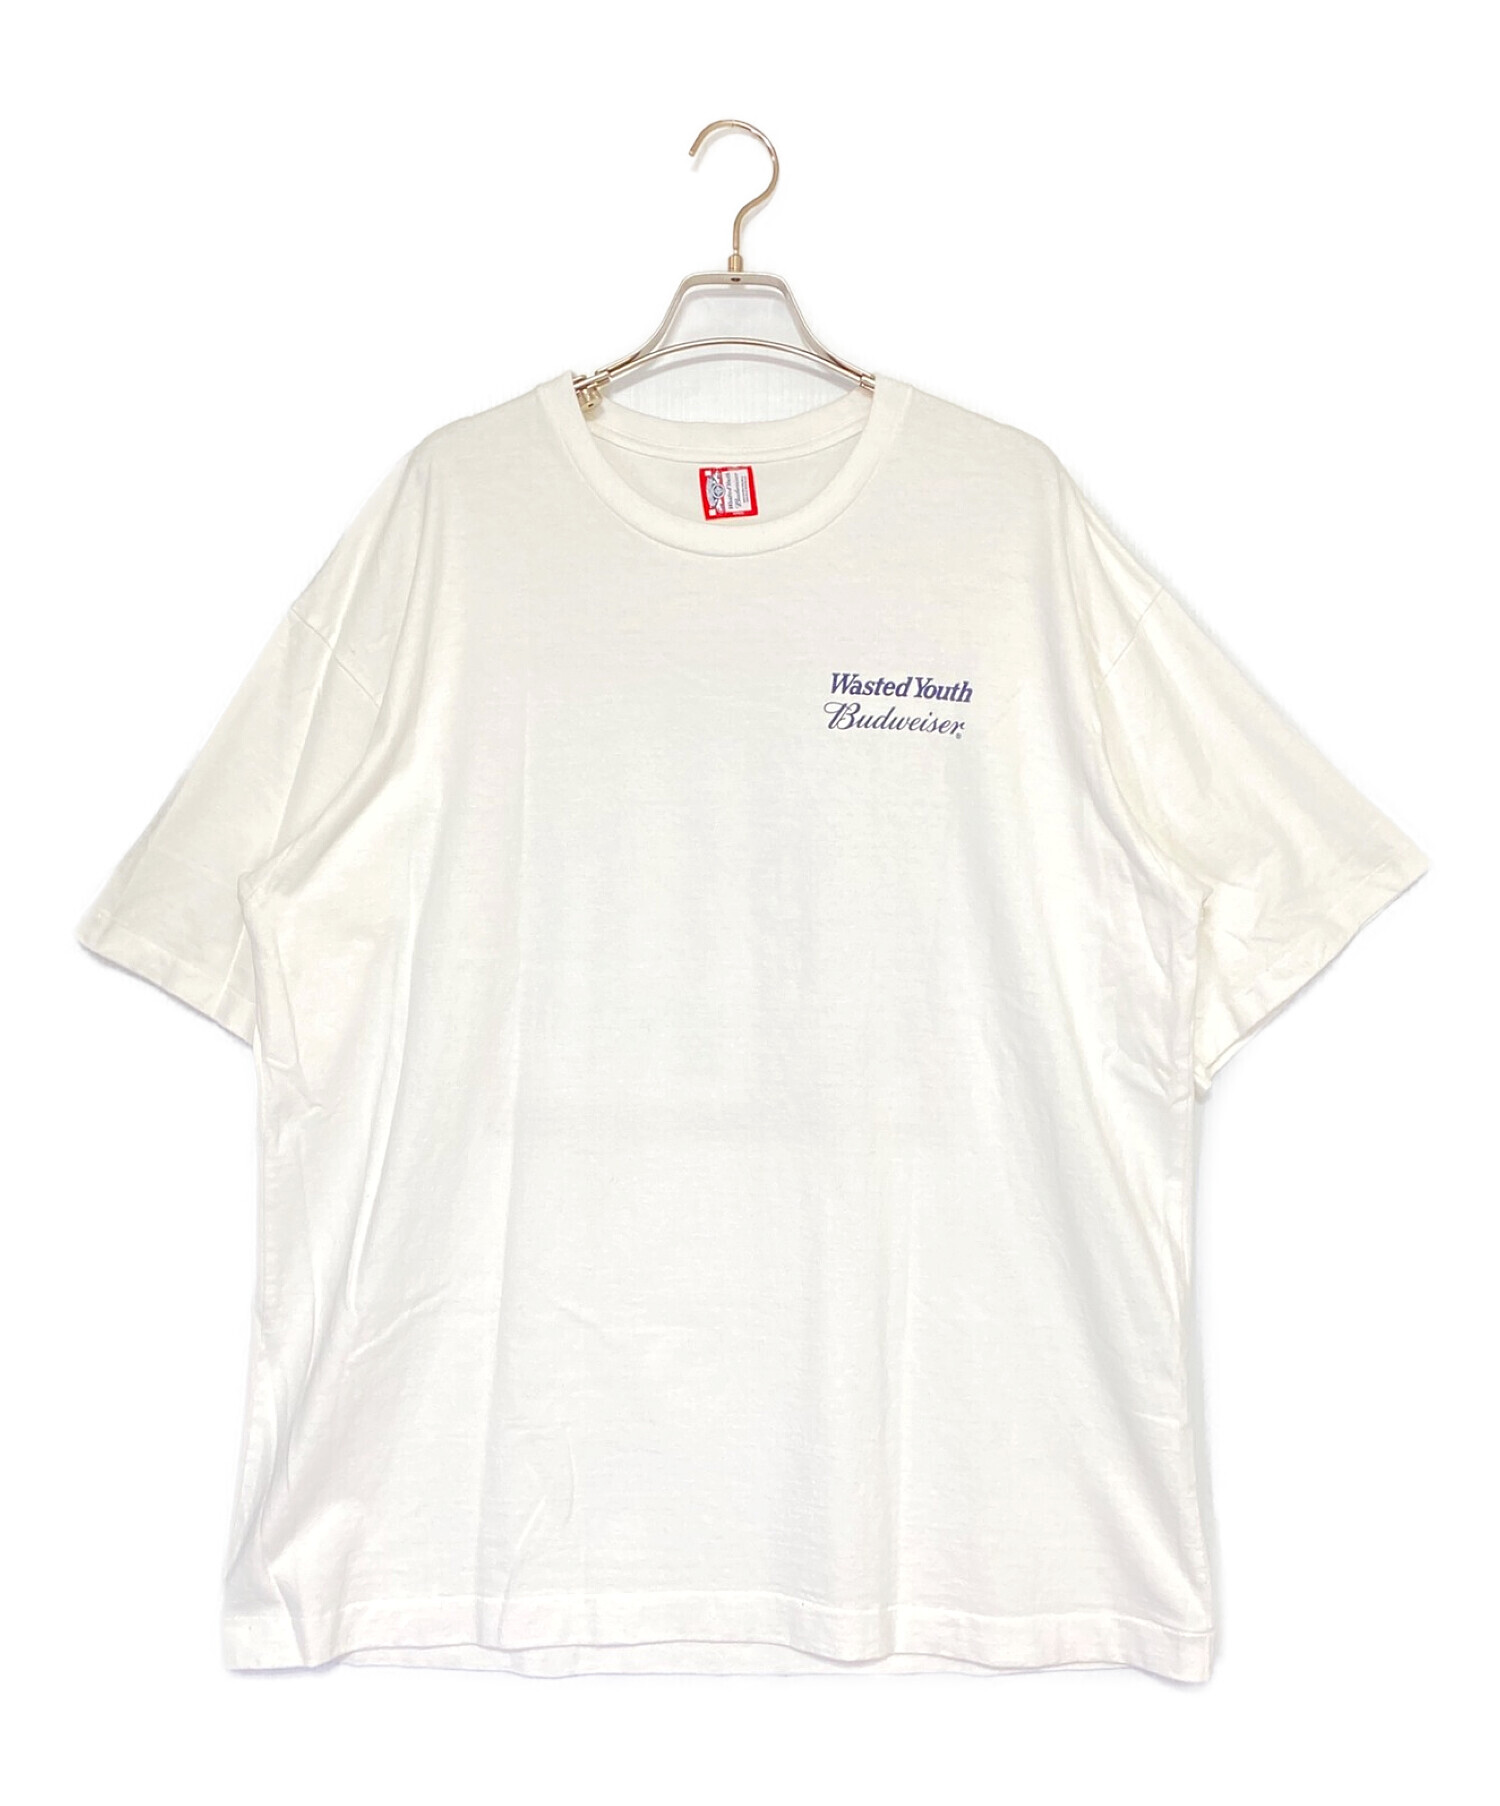 XLサイズ Wasted Youth T-SHIRT#2 White